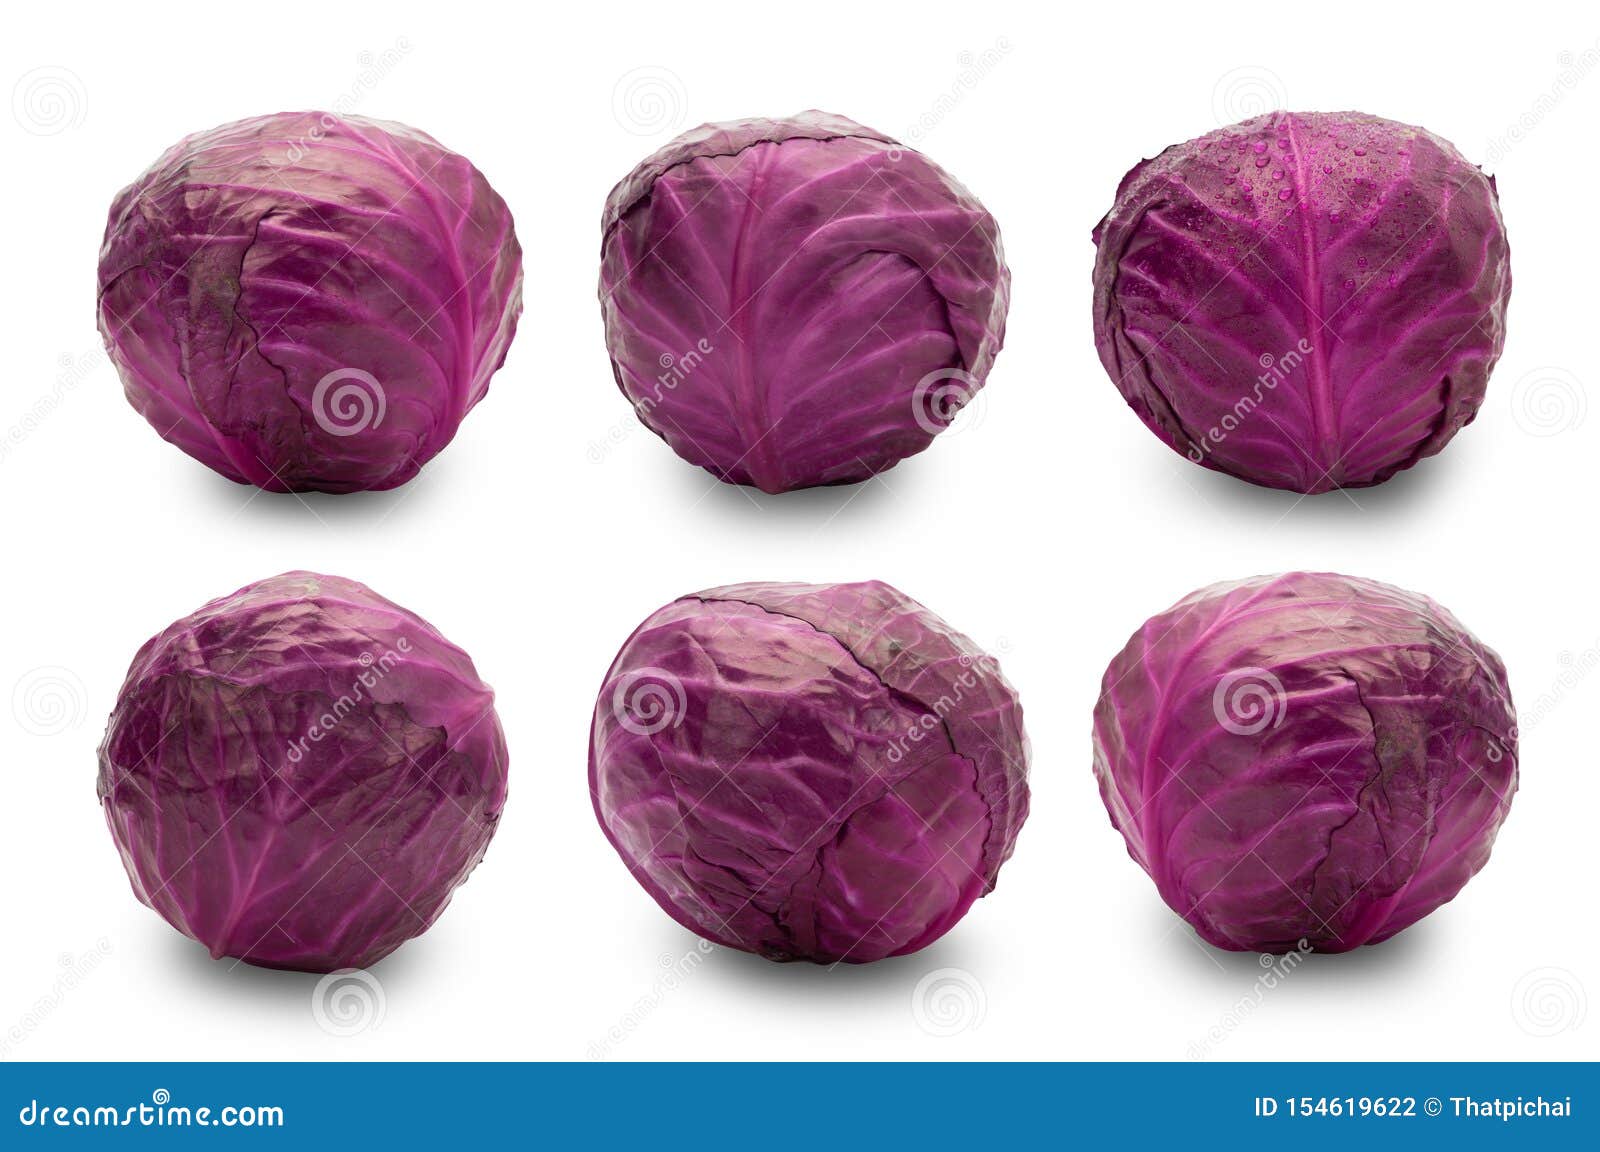 Set Of Whole Red Cabbage Isolated On White Background With Clipping Path Stock Photo Image Of Healthy Harvest 154619622,Thai Food Meme